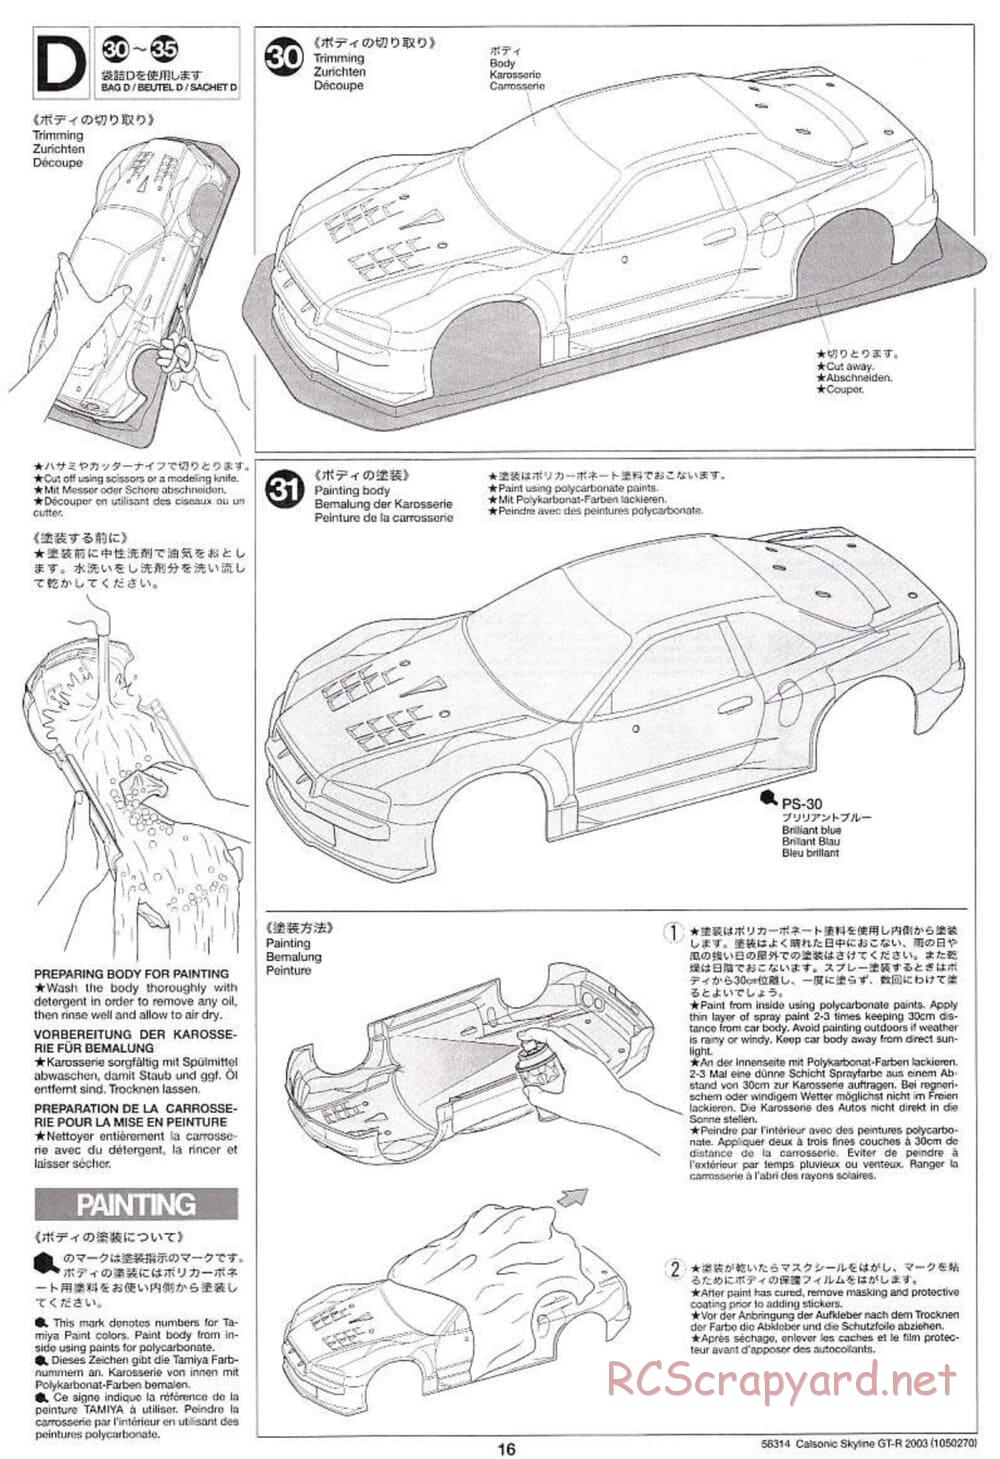 Tamiya - Calsonic Skyline GT-R 2003 - TT-01 Chassis - Manual - Page 16